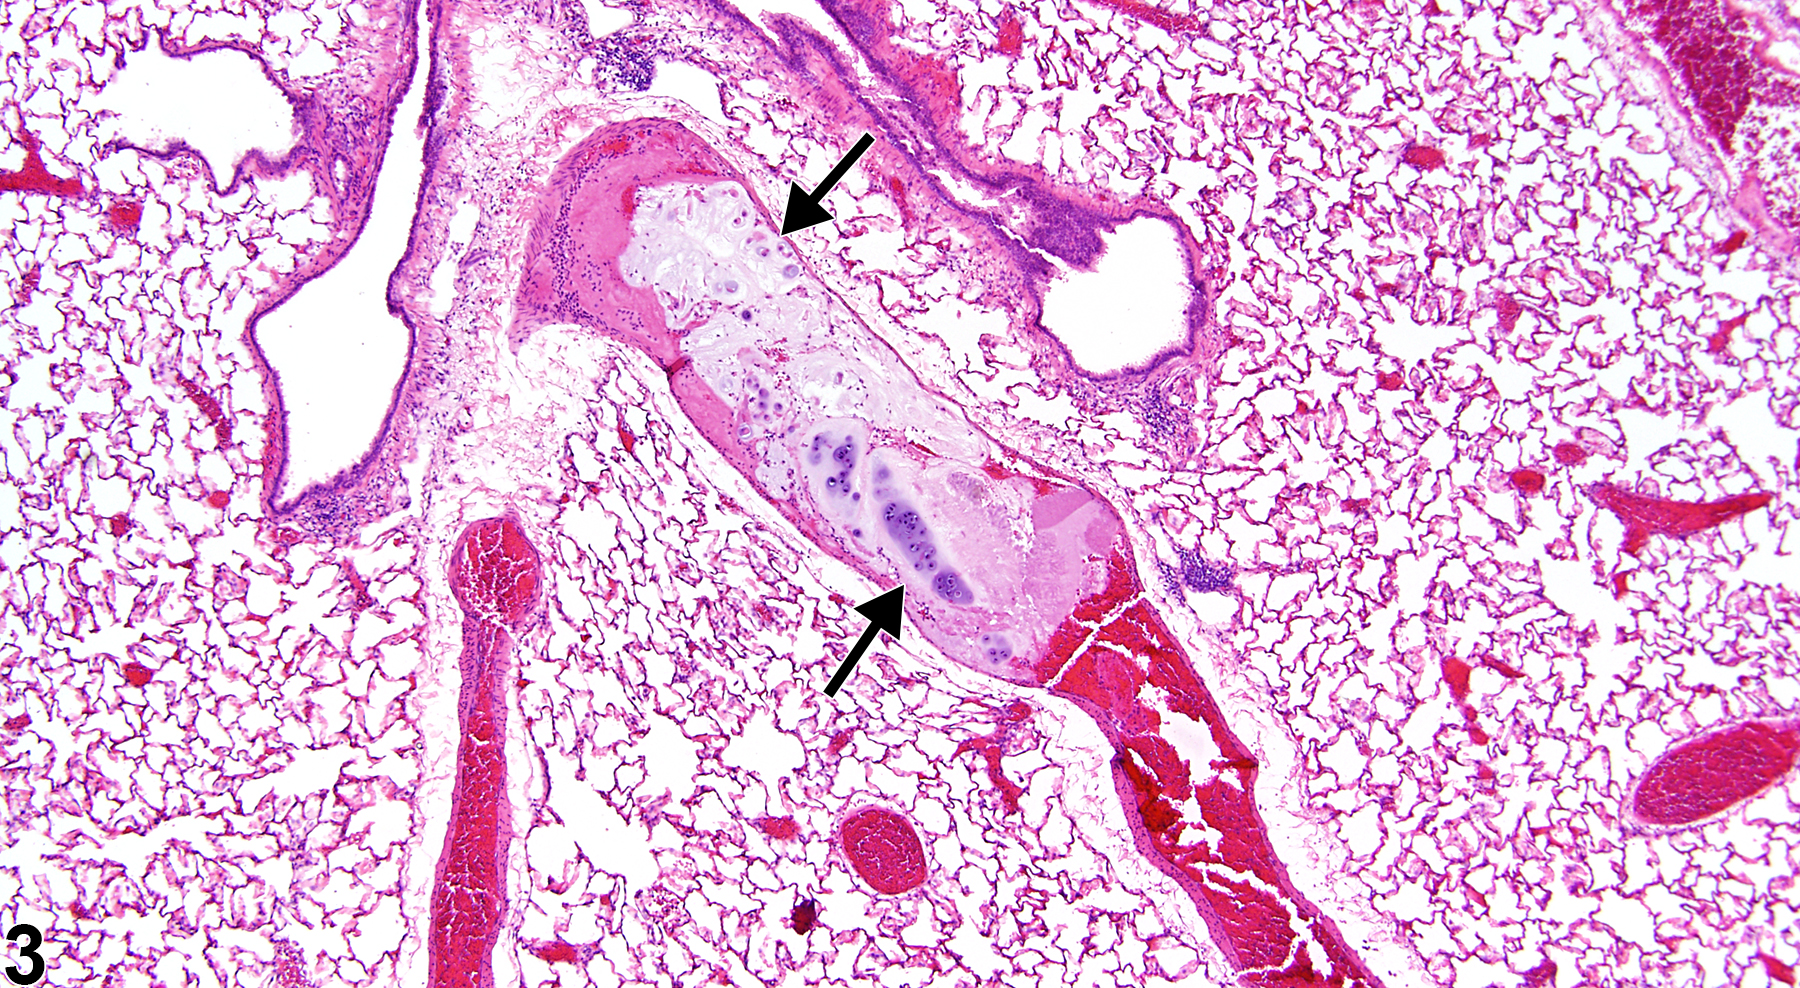 Image of embolus, cartilage in the lung, artery from a male F344/N rat in a chronic study